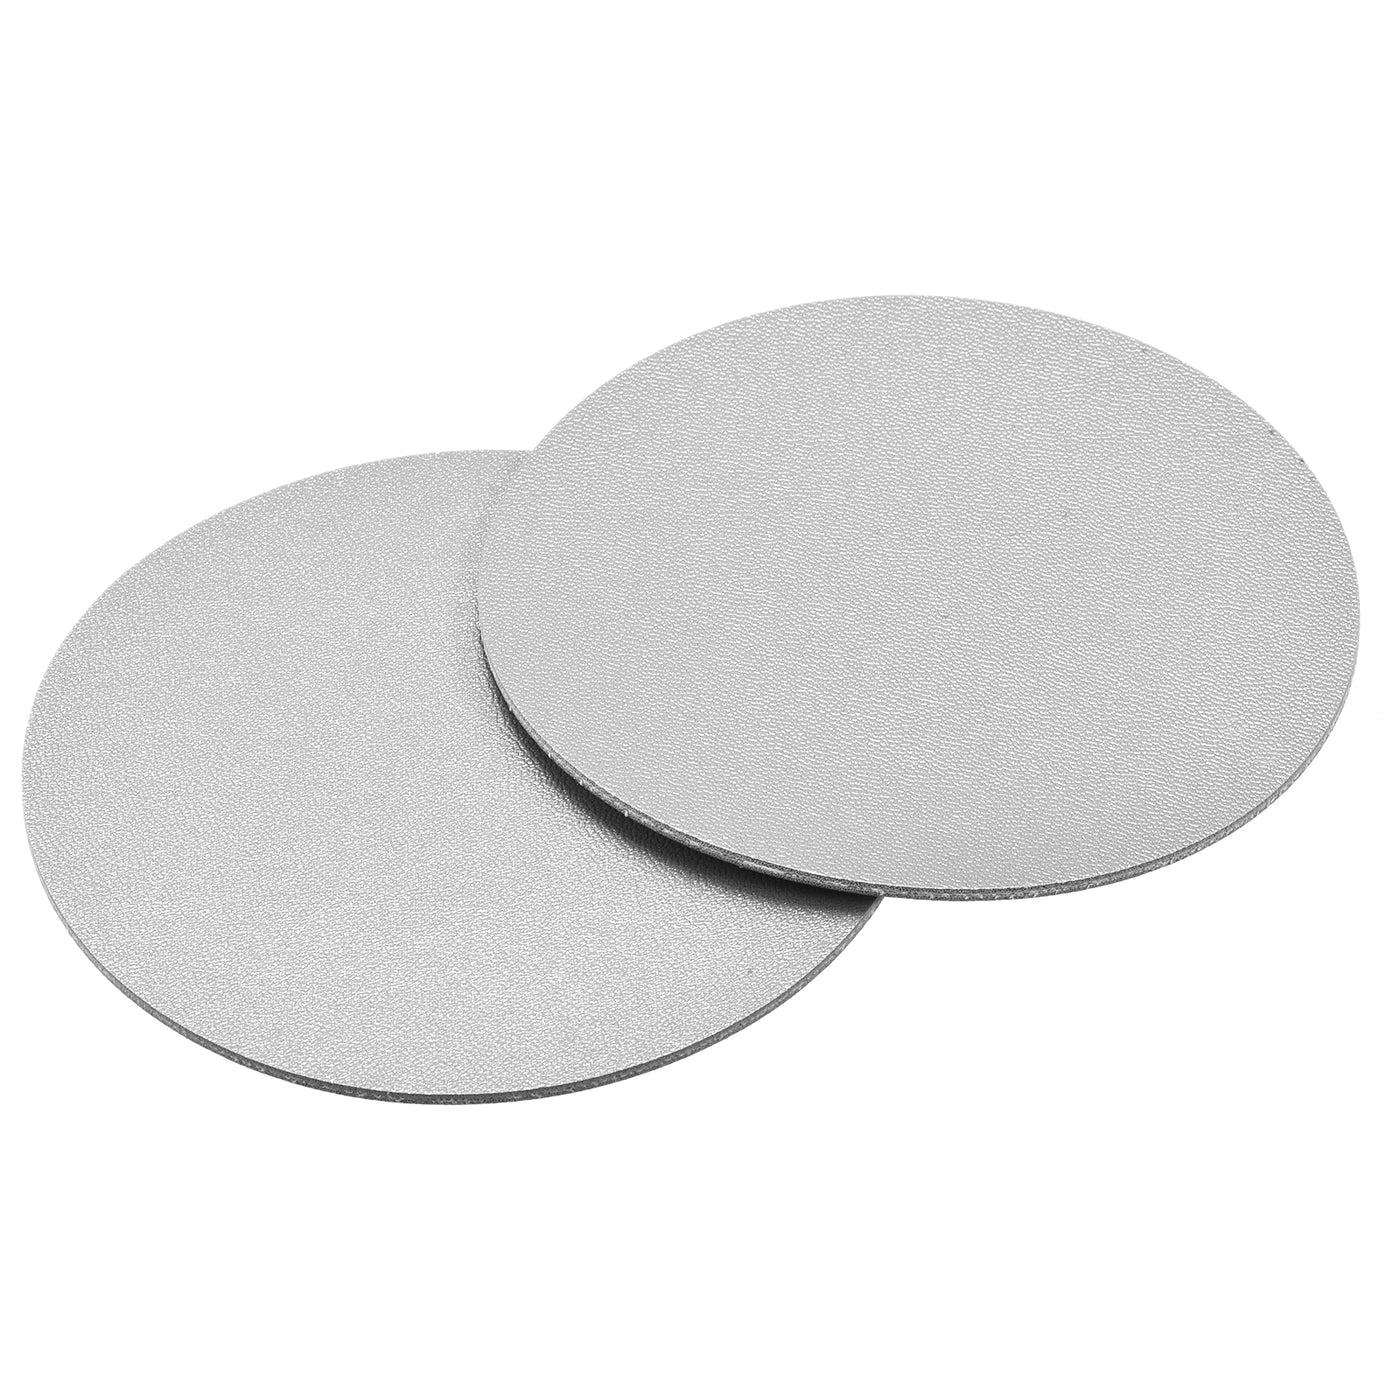 uxcell Uxcell 102mm(4.02") Round Coasters PU Cup Mat Pad for Tableware Silver Tone 2pcs